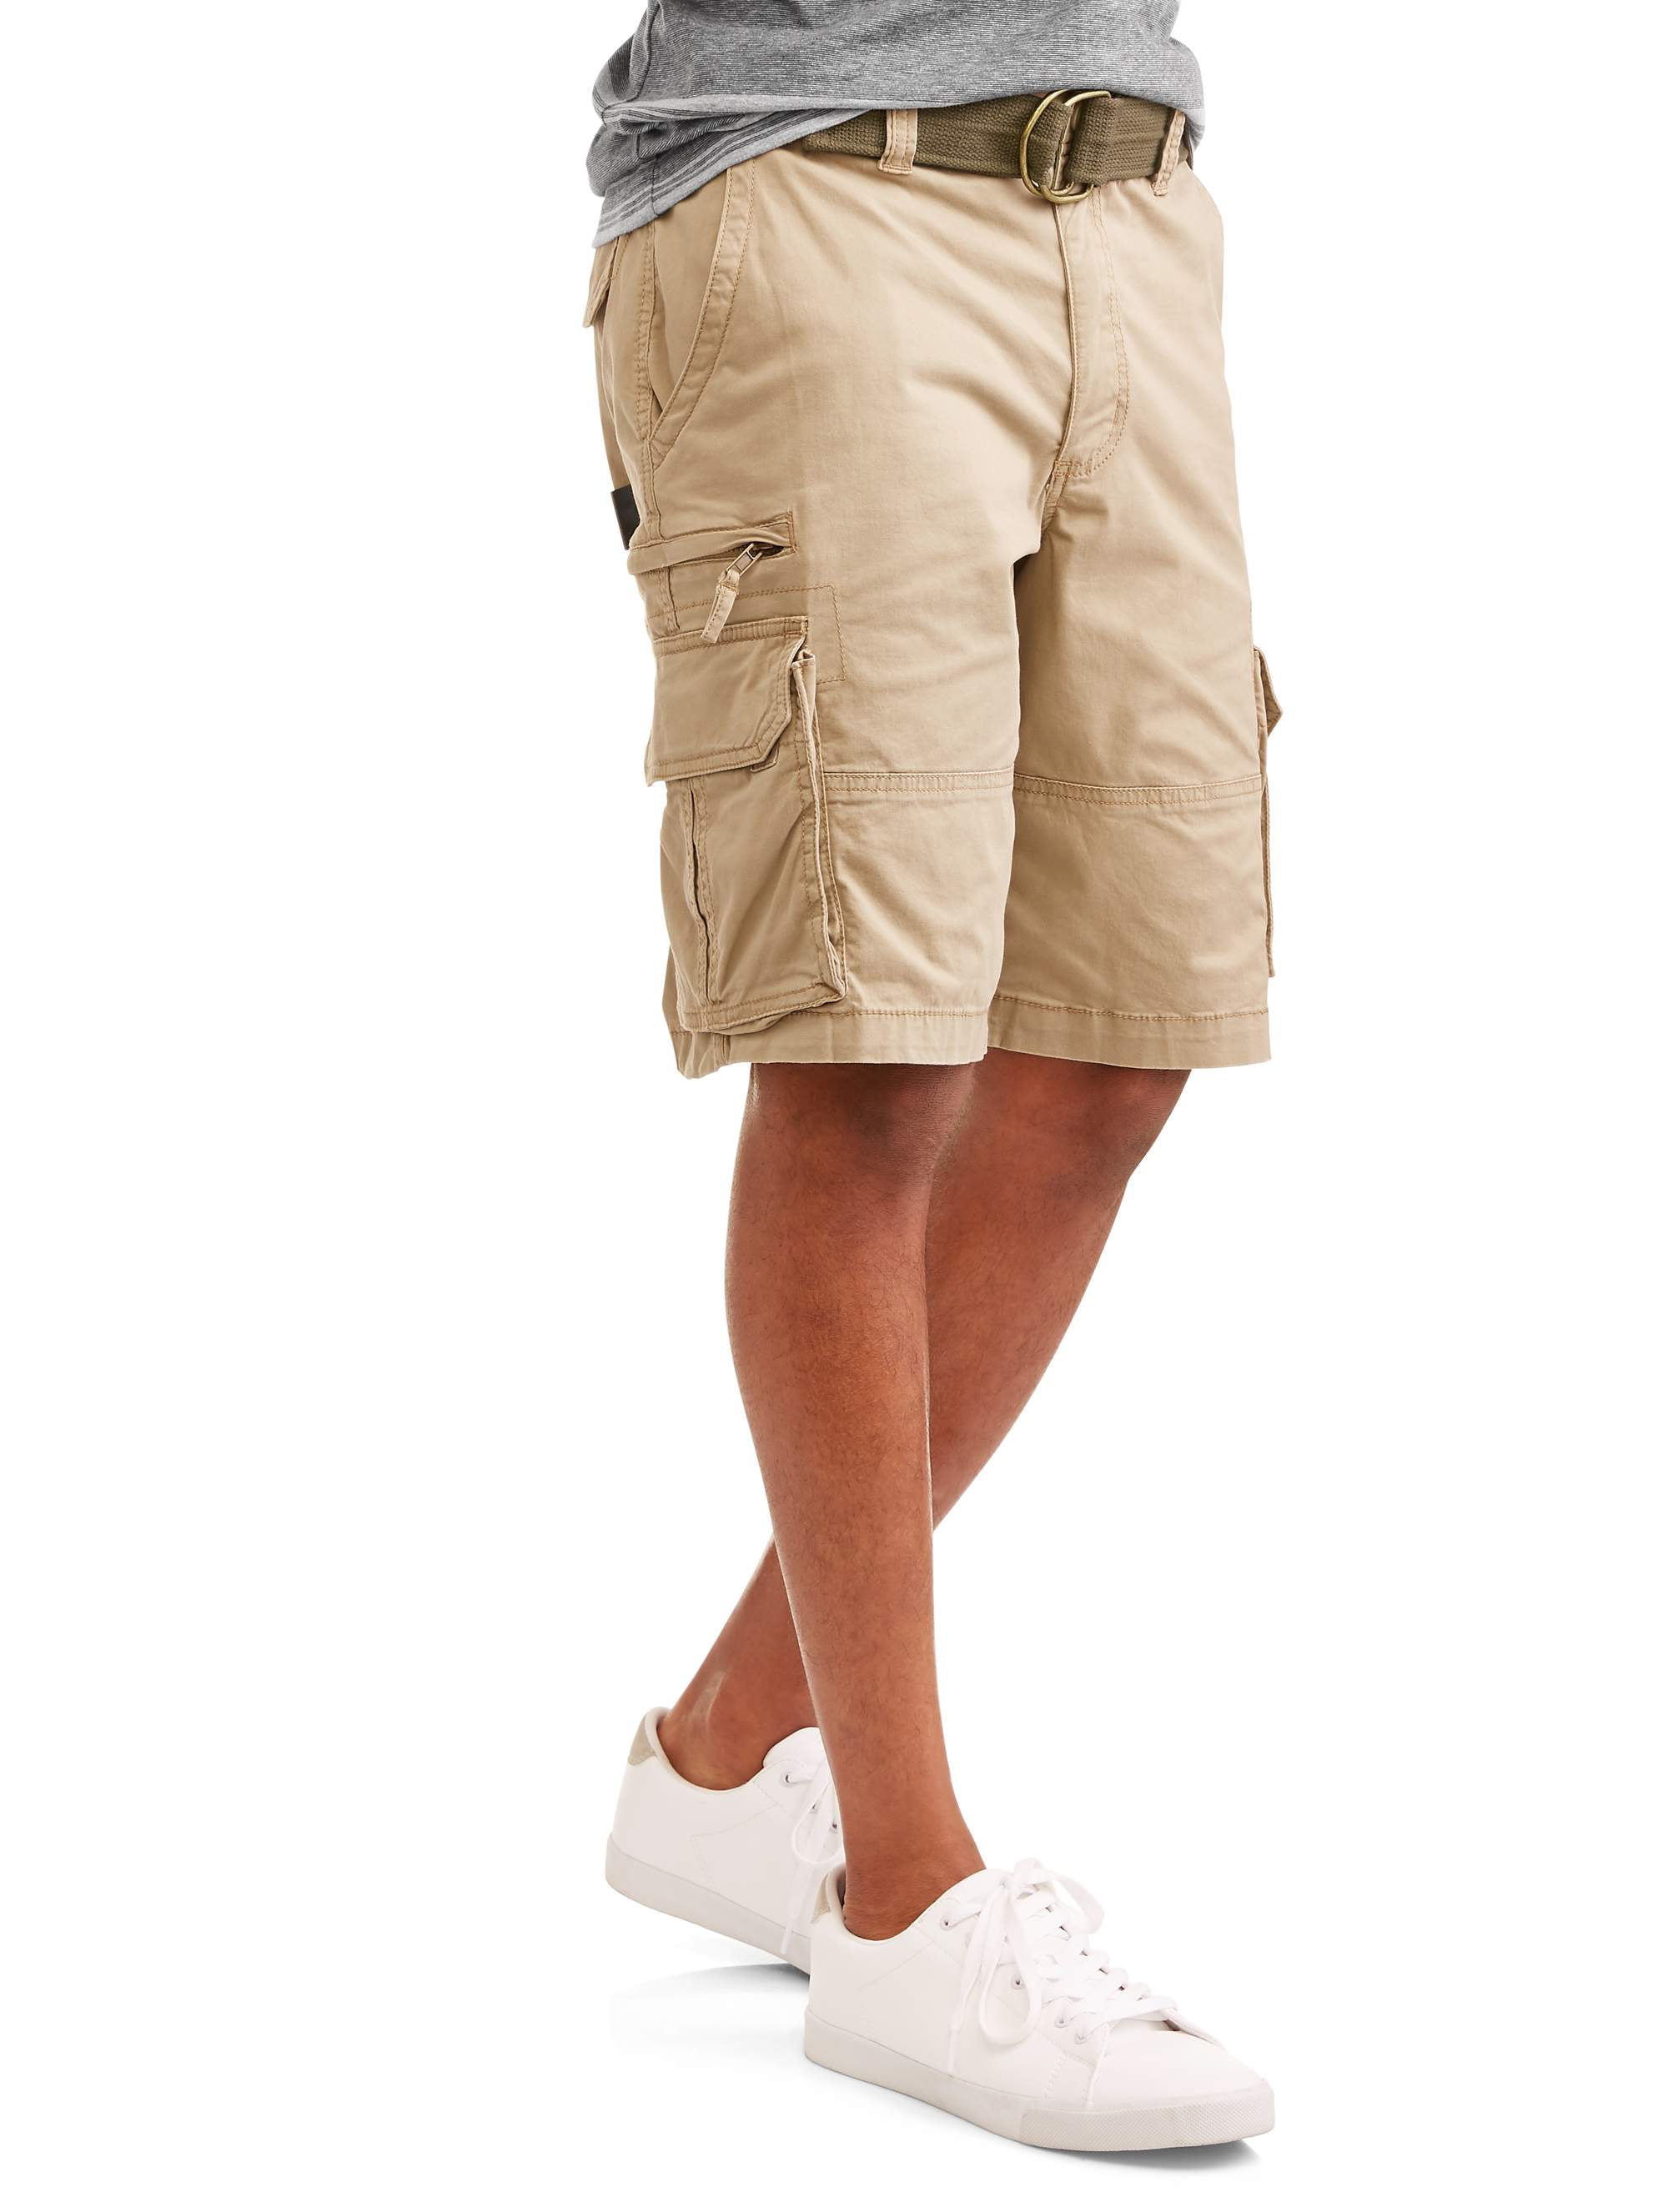 George Men's Stacked Cargo Shorts Khaki Size 34 ~11" INSEEM AT THE KNEE~ SAND 